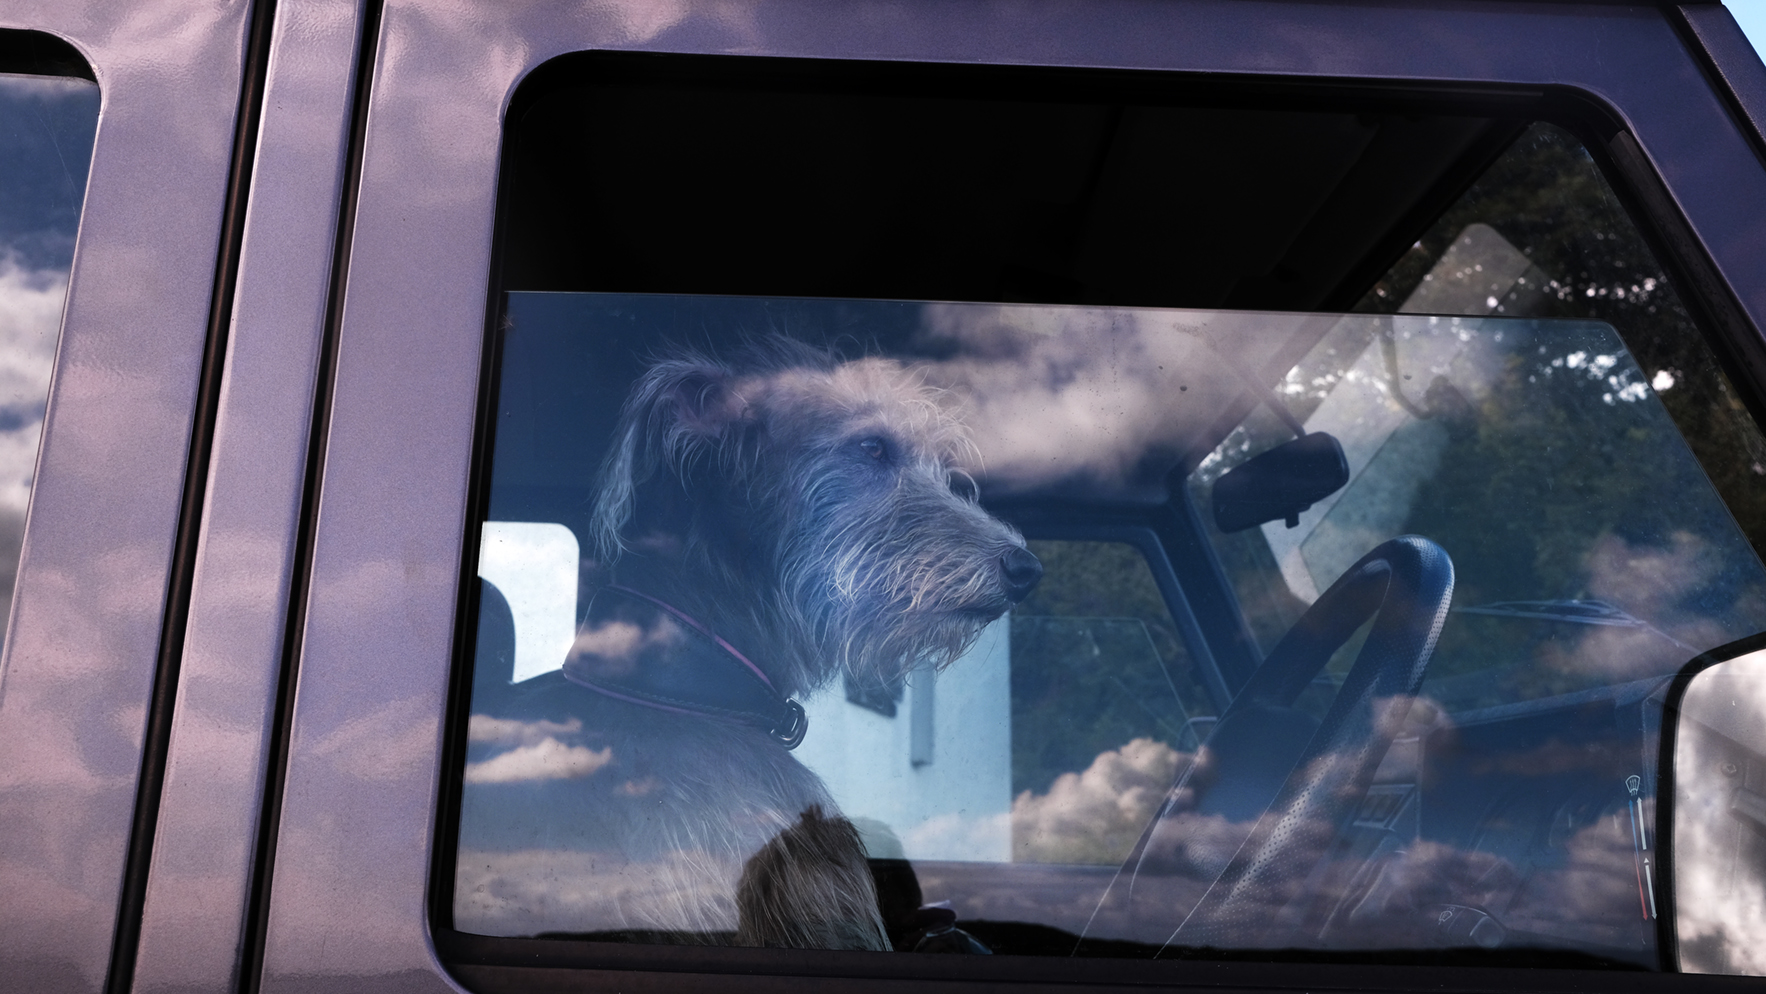  Dog in the drivers seat. Tayvallich, west coast Scotland. 